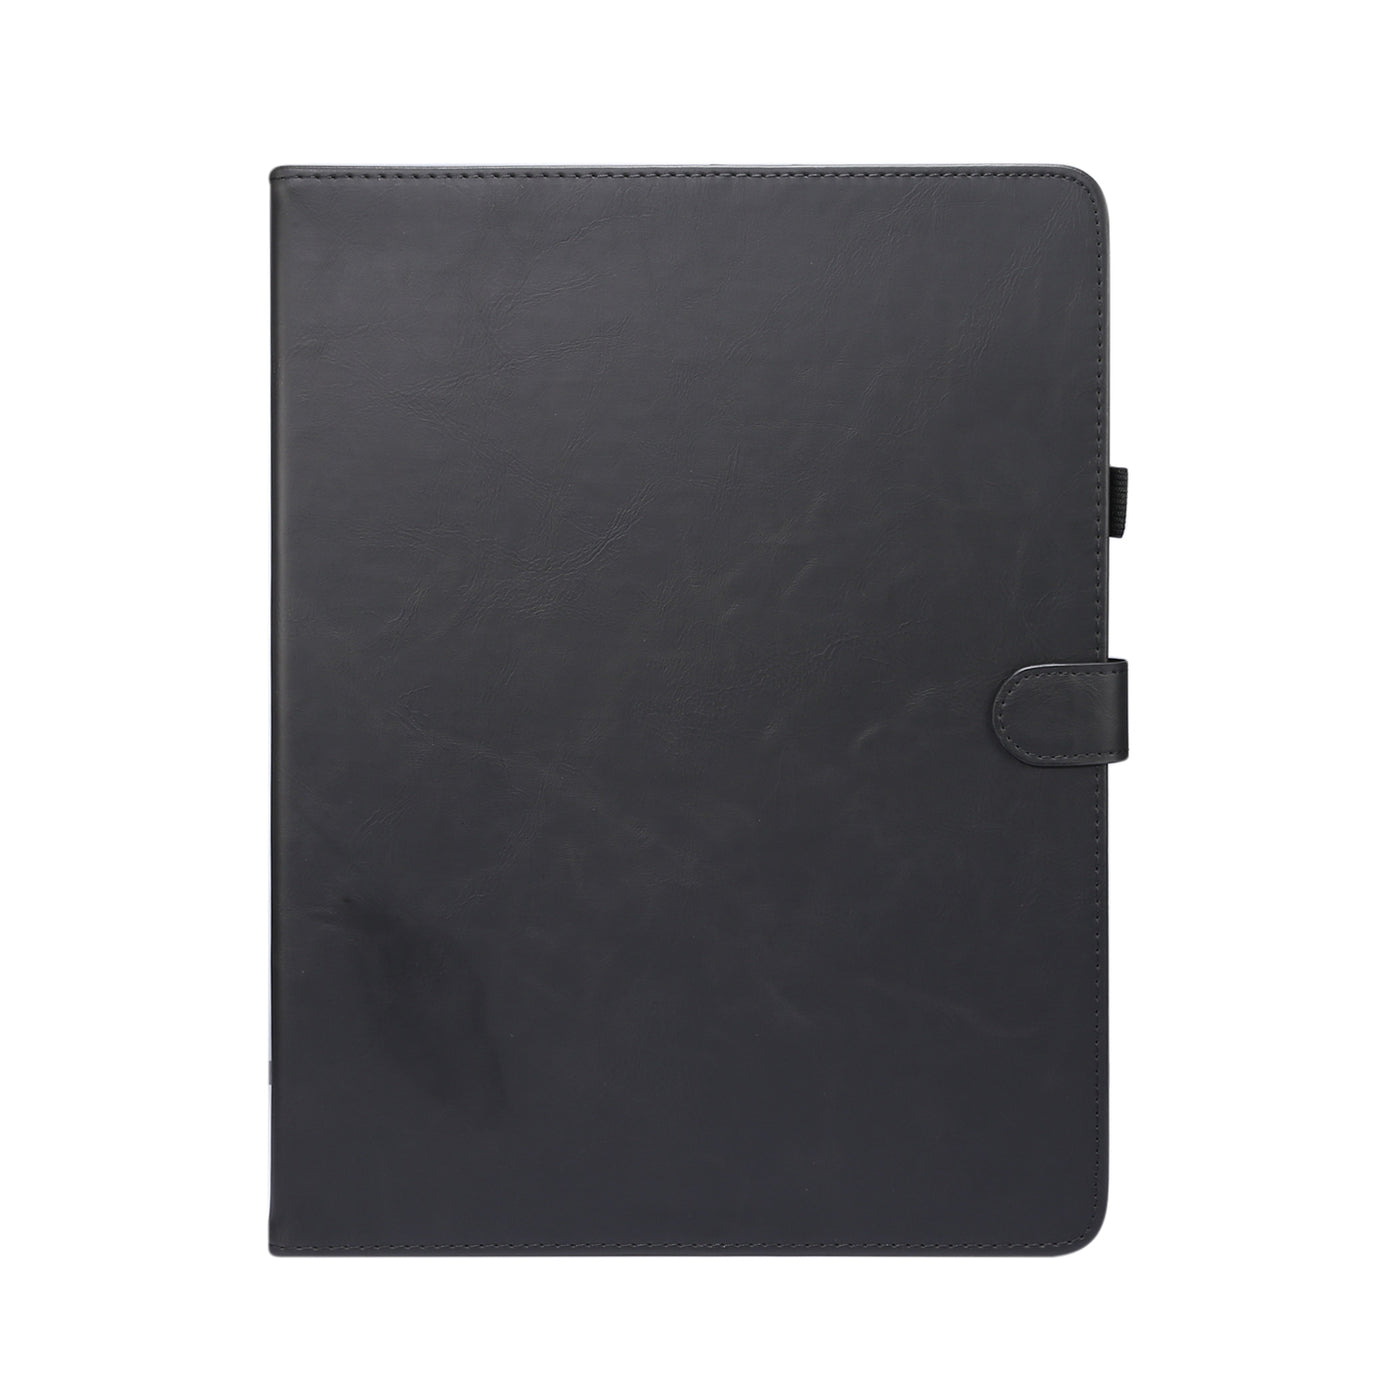 Apple iPad Pro 12.9 inch (4th Gen)  black color leather wallet flip cover case By excelsior